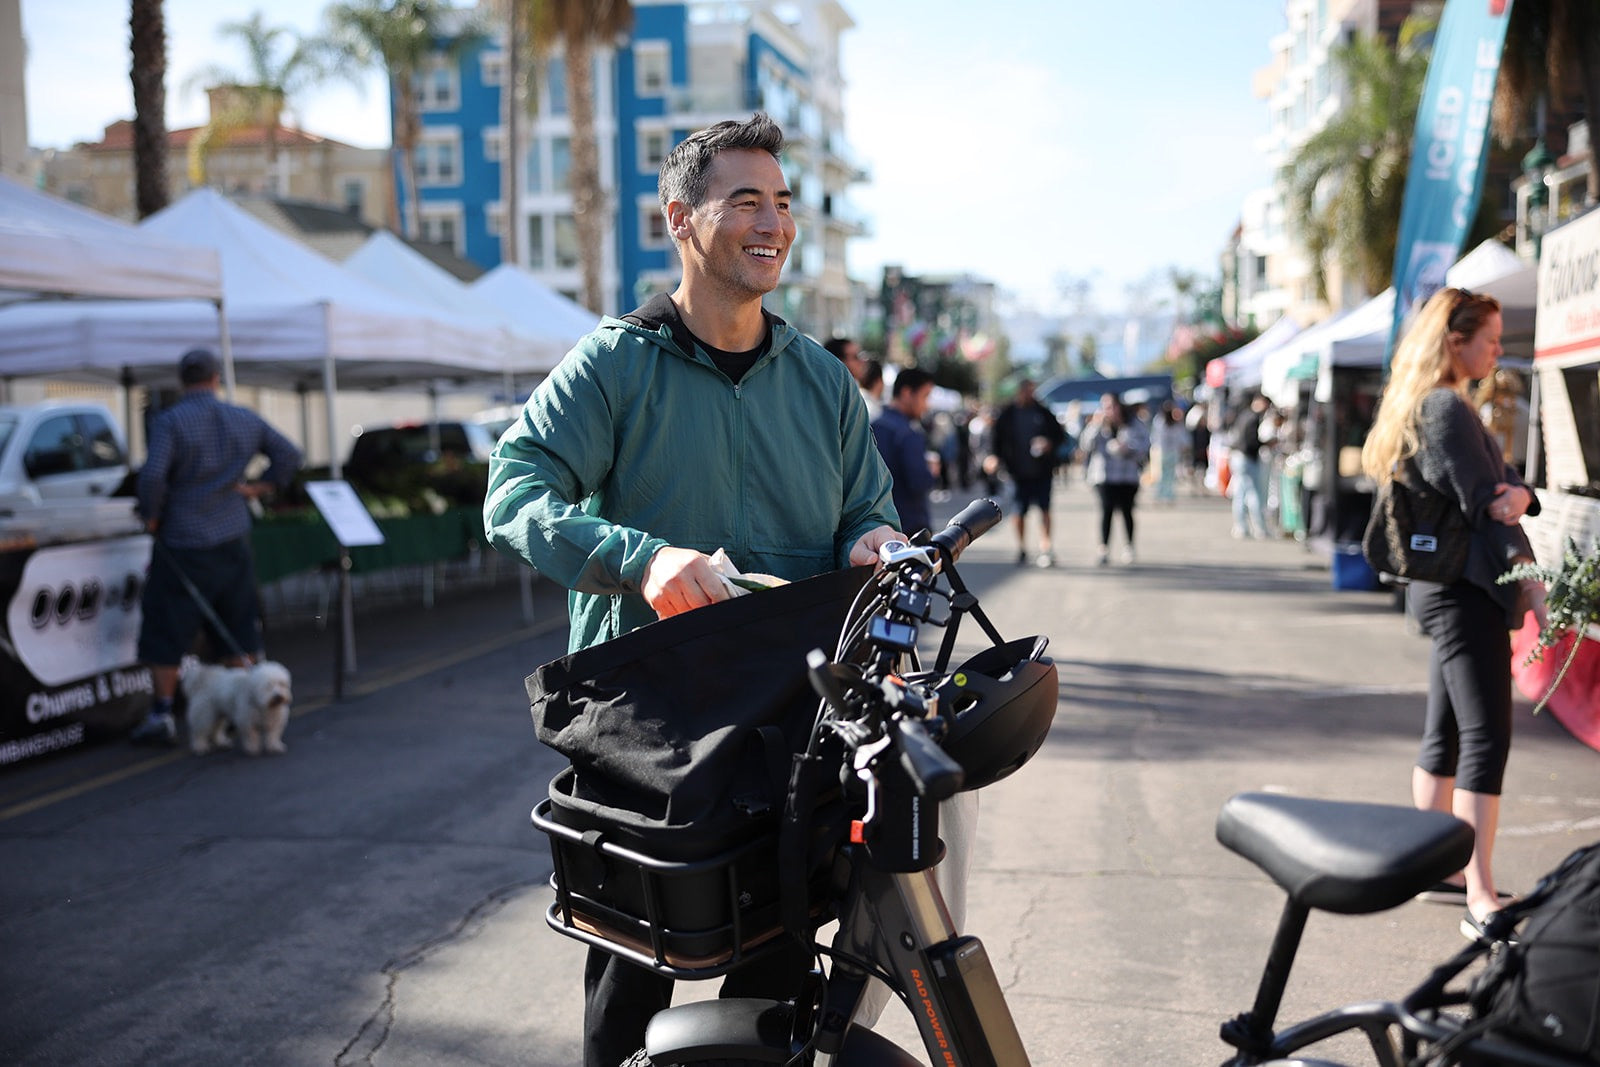 A man loads groceries into the front basket of his RadRunner 3 Plus during a sunny day at the farmer's market.